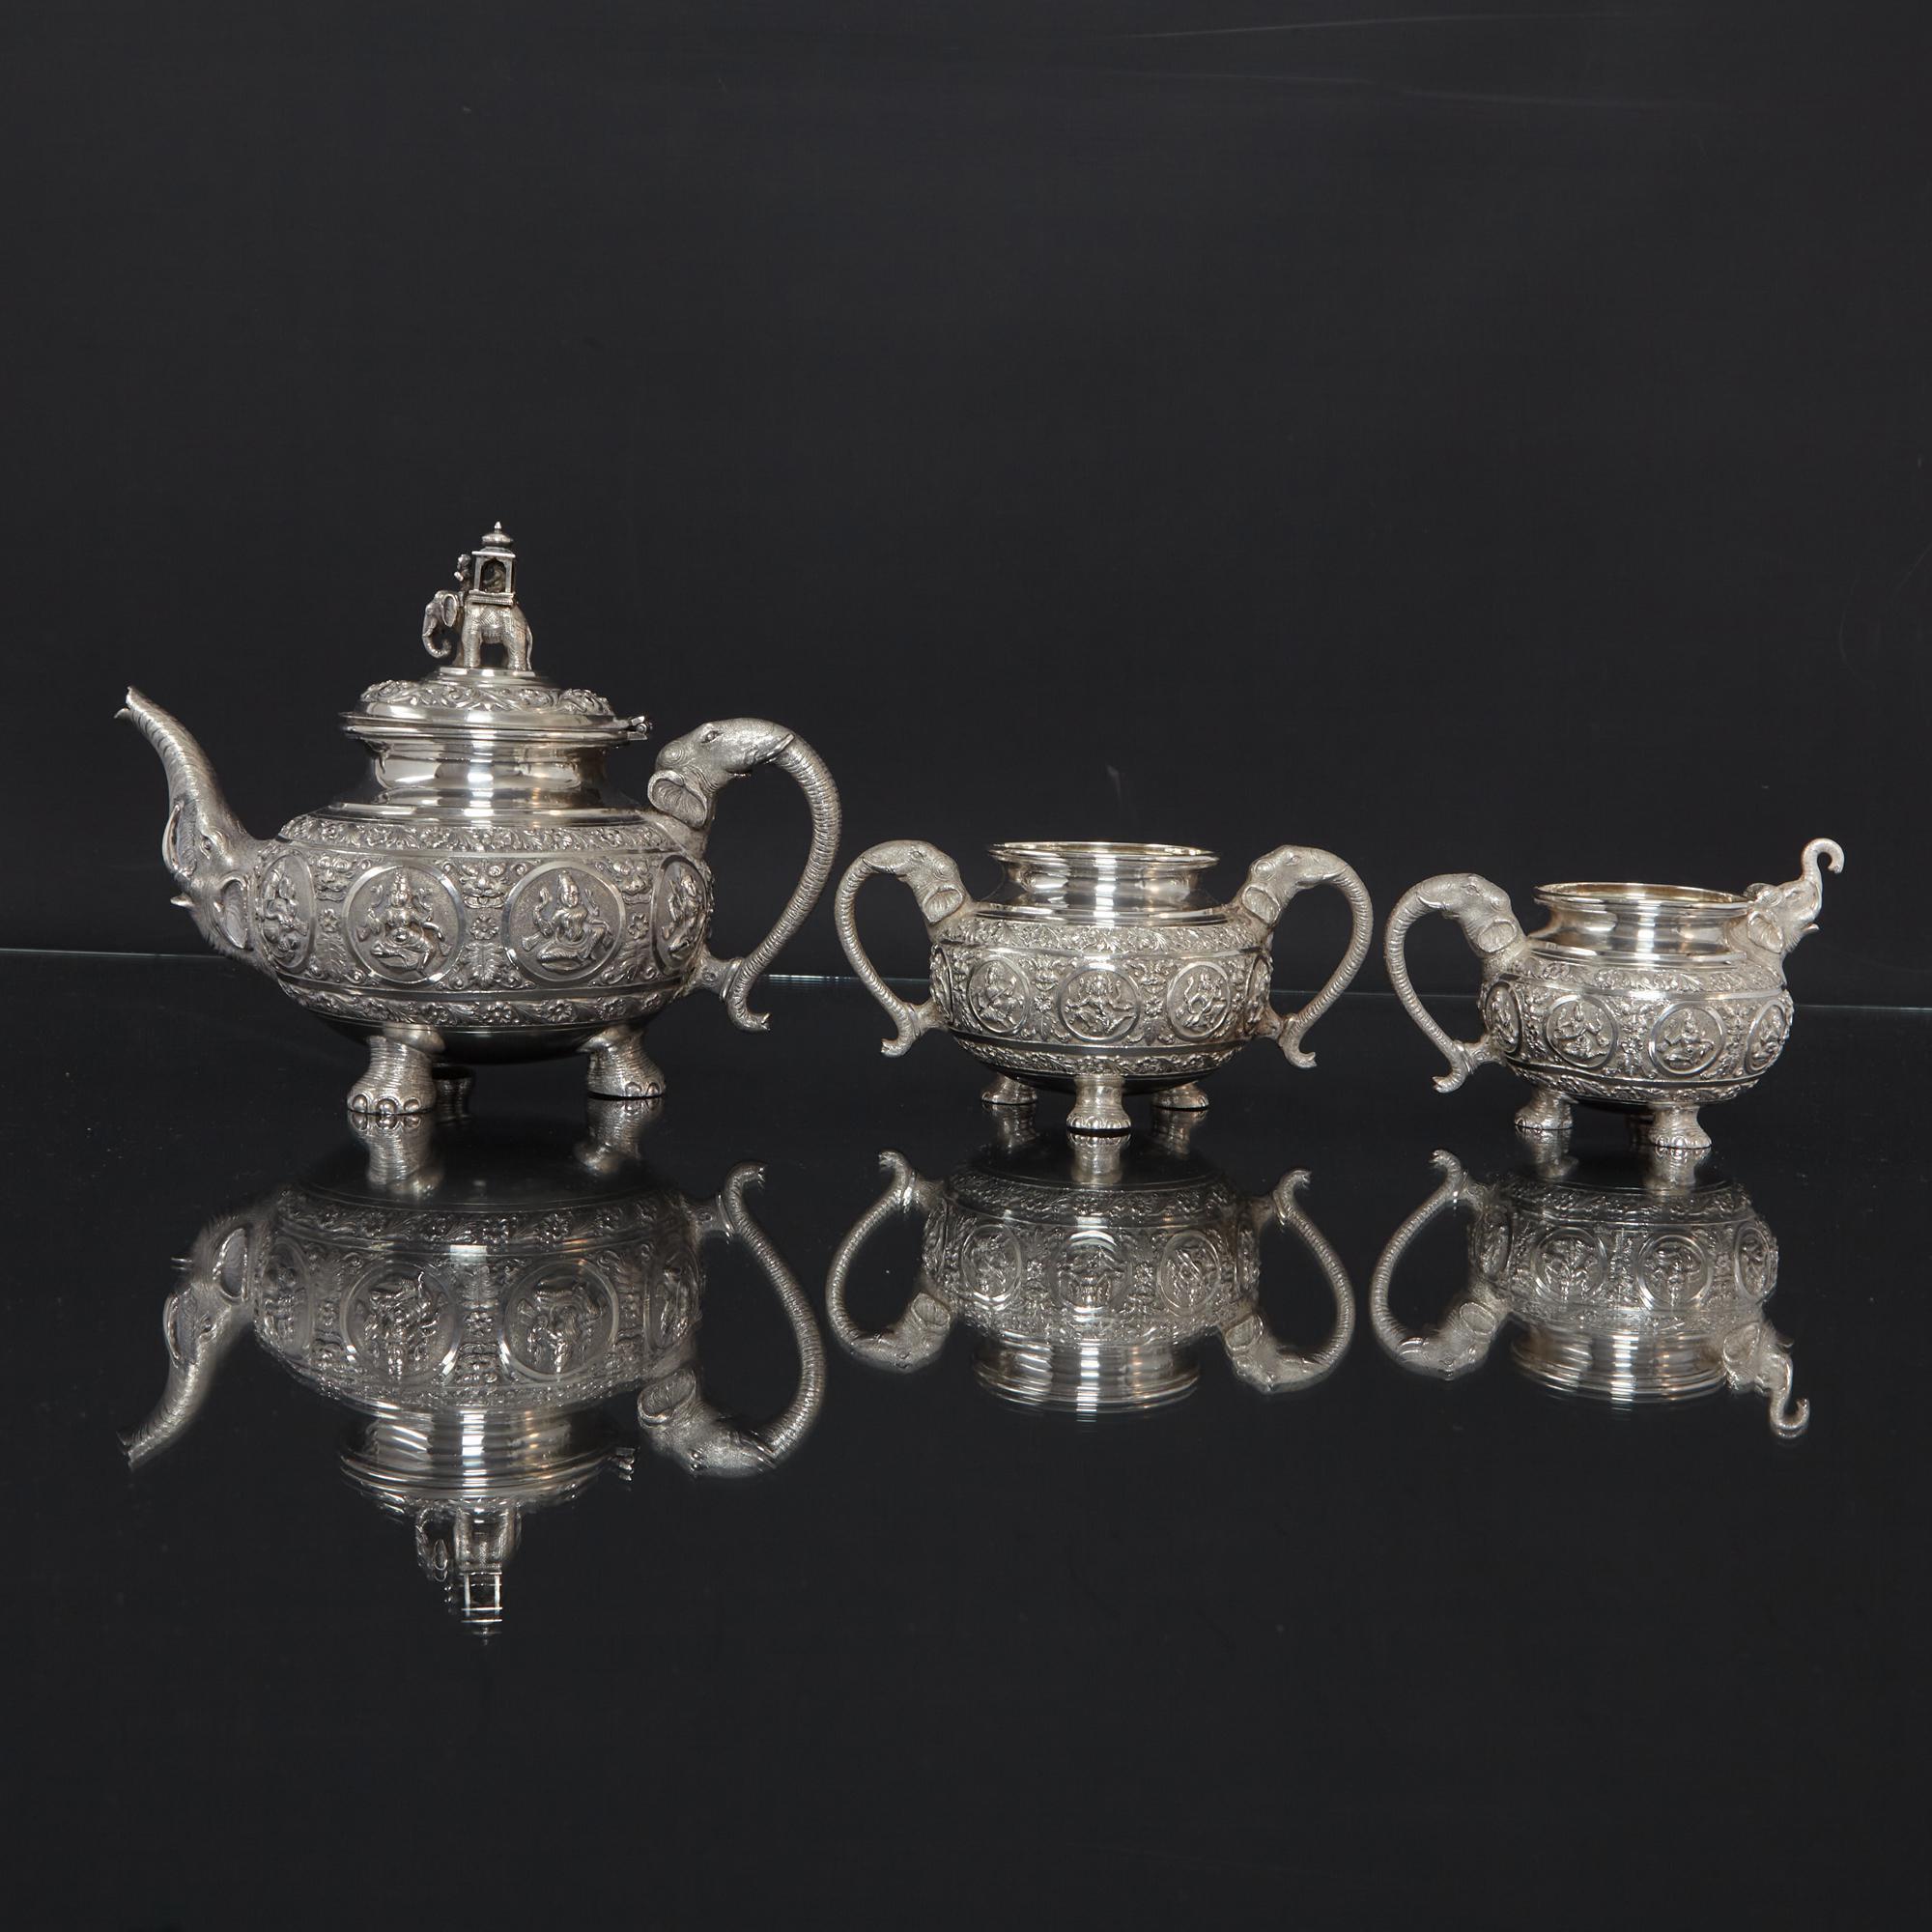 Delightful and decorative three-piece Indian silver tea set of exceptional quality. Each piece is heavily hand-chased in the finest detail, featuring panels with various deities, foliage and floral designs.

Applied, hand-chased castings include the